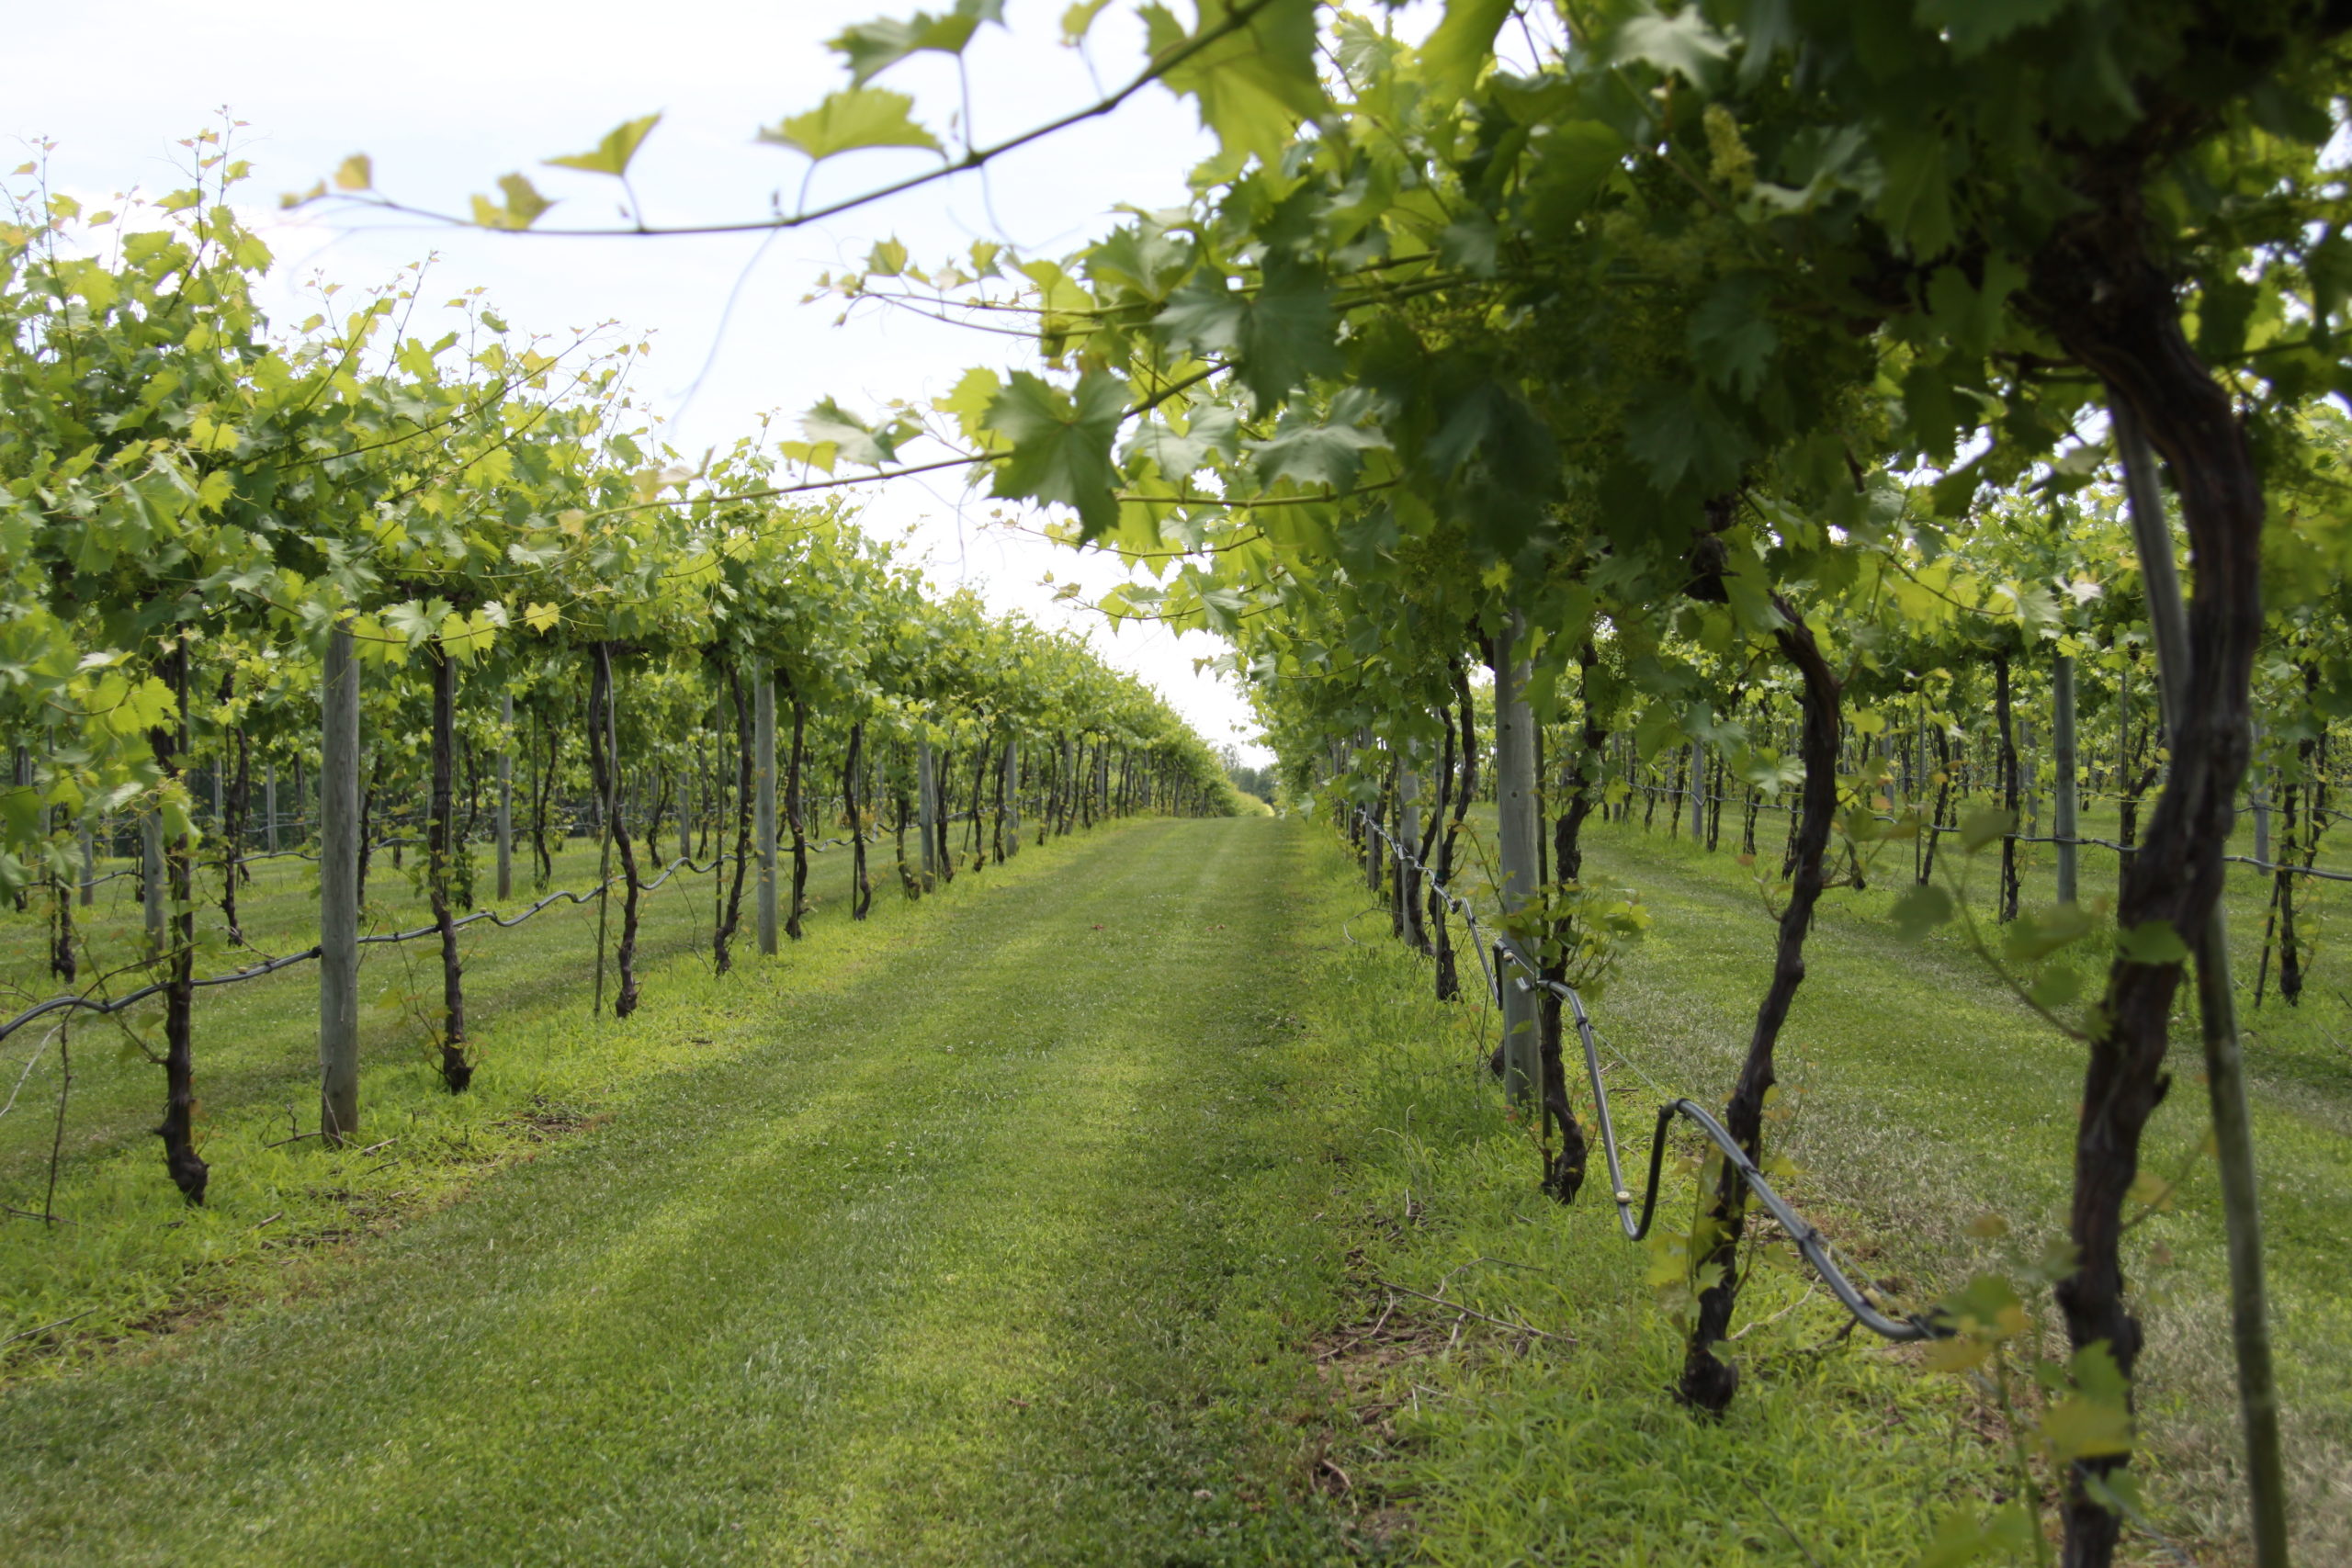 Mid spring view of vineyard grape canopy from Southern Illinois